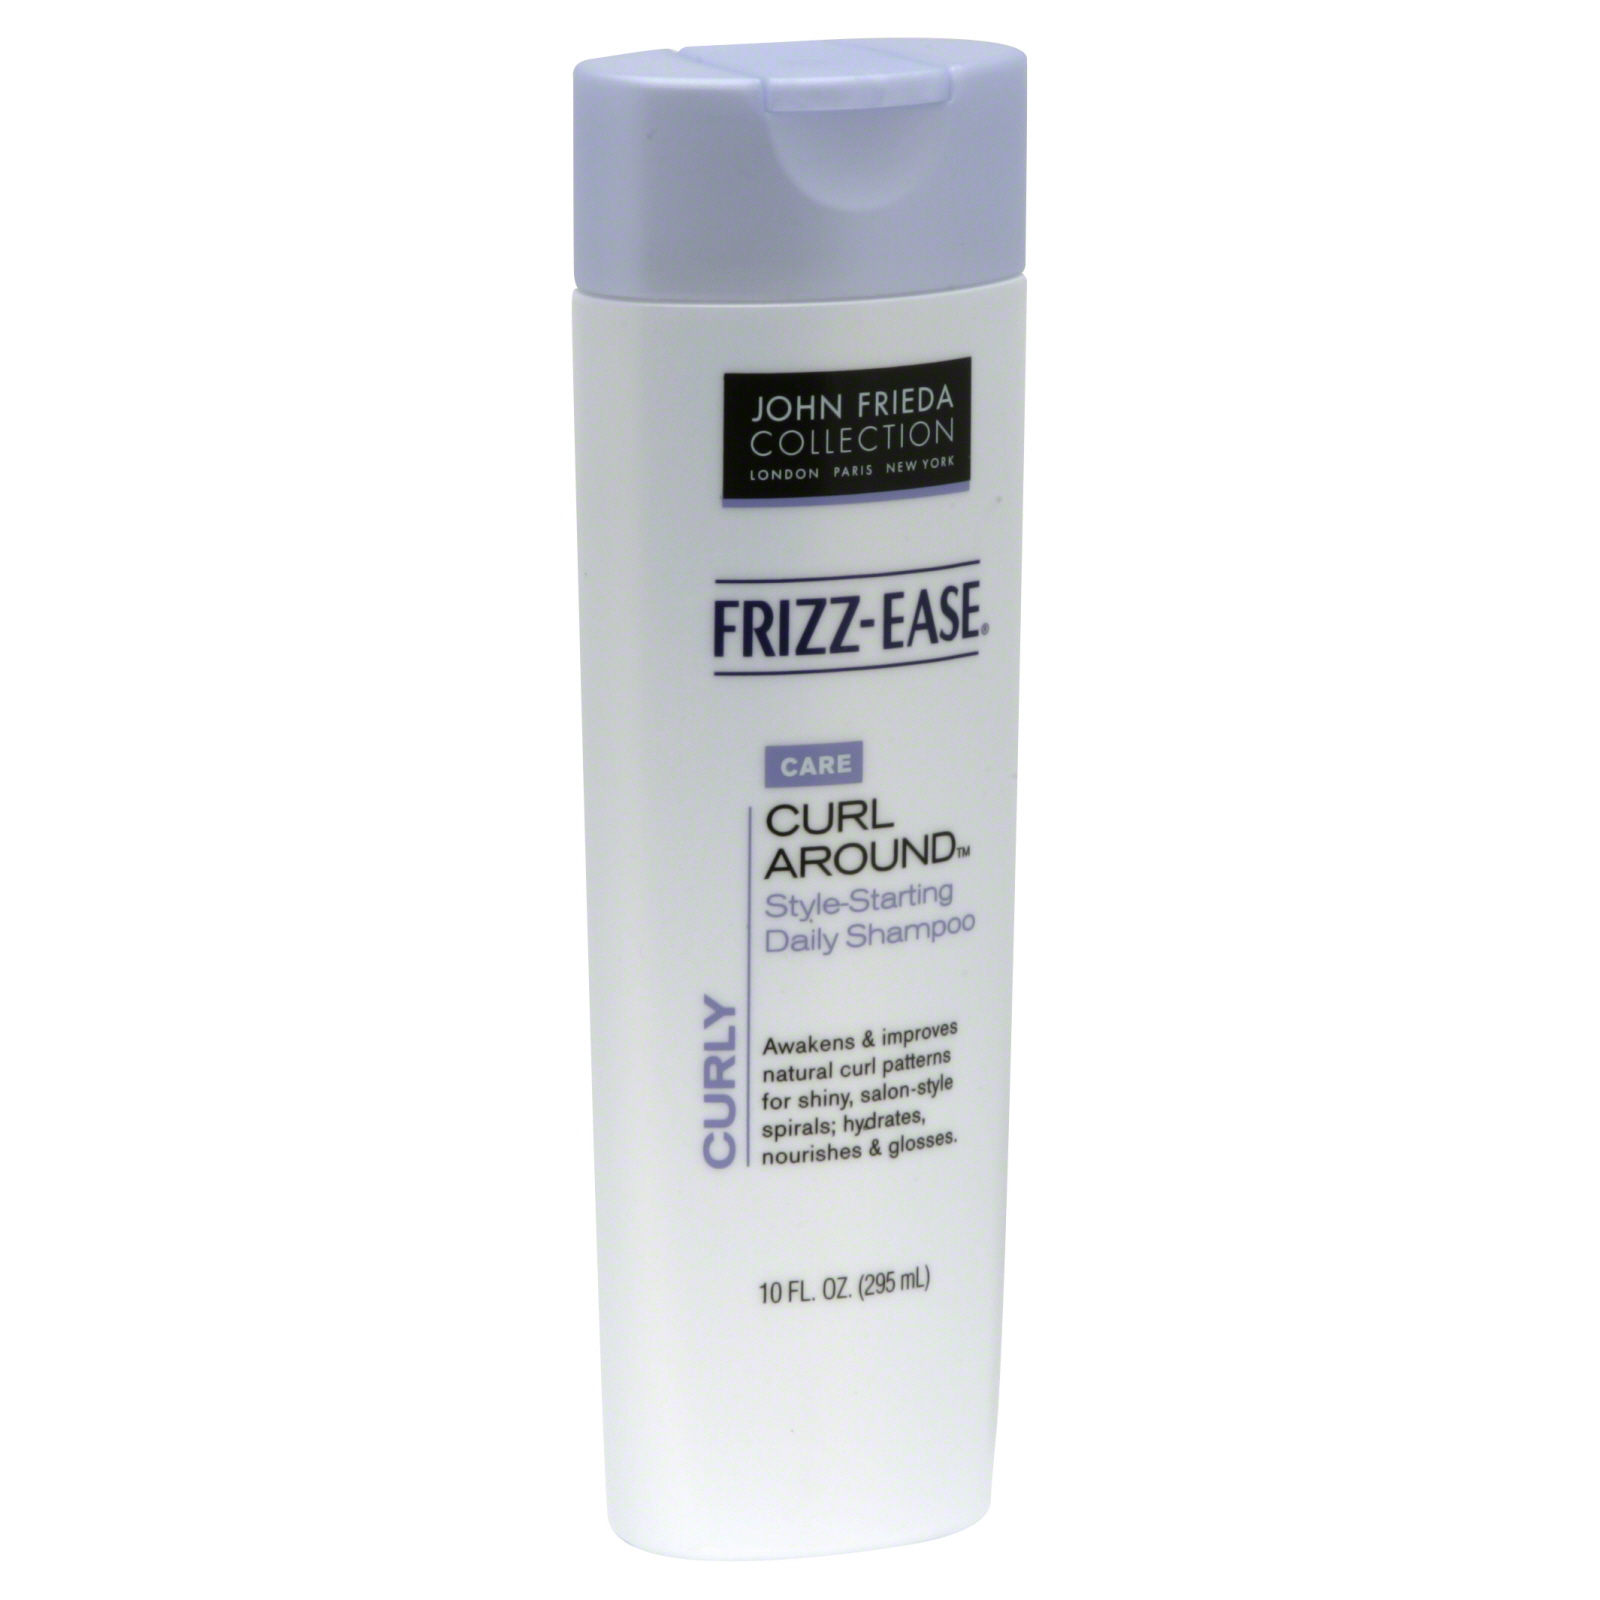 Frizz-Ease Curl Around Style-Starting Daily Shampoo, Curly, 10 fl oz (295 ml)